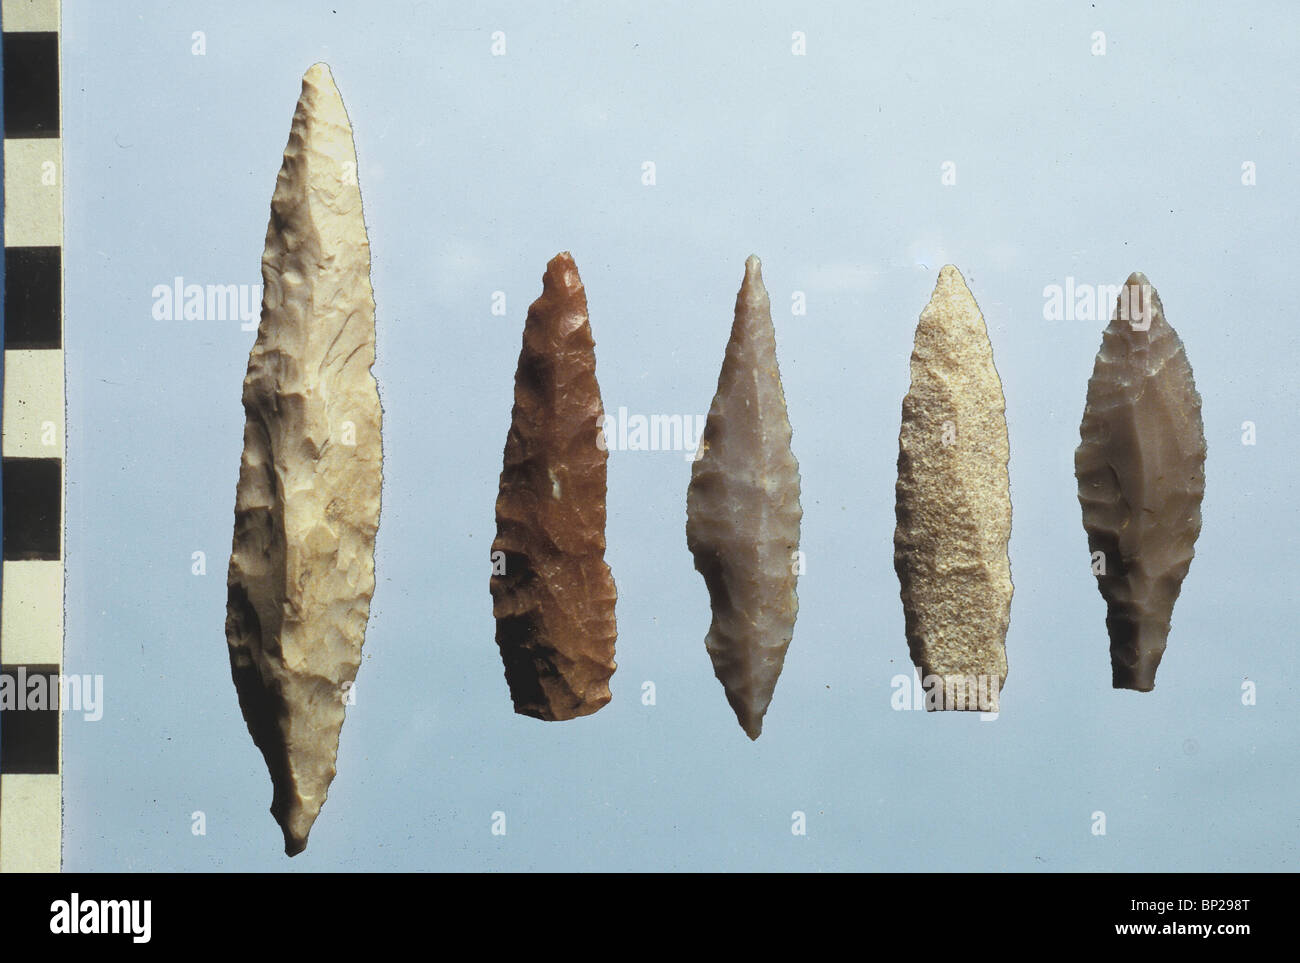 2799 The Ovdah Valley Negev Flint Made Arrows Neolothic Period Stock Photo Alamy